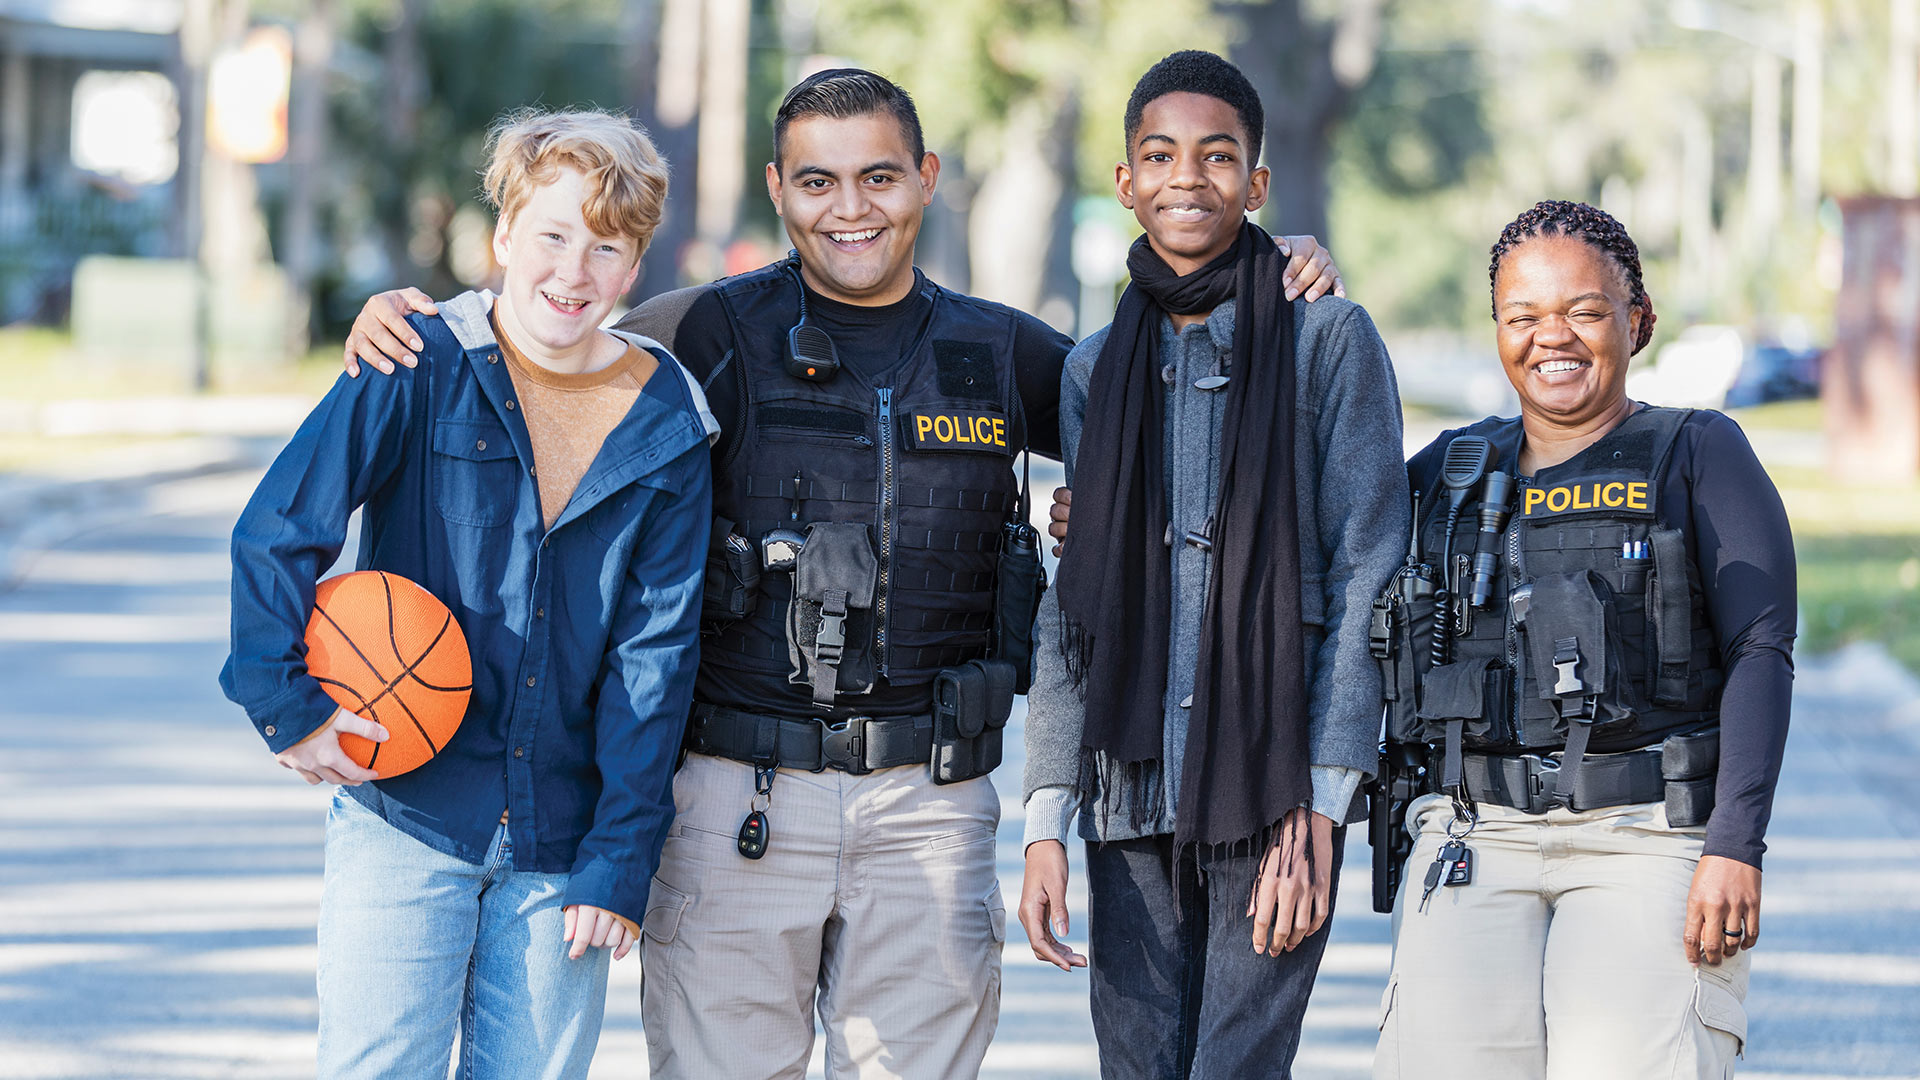 How hope science can help law enforcement better engage with communities